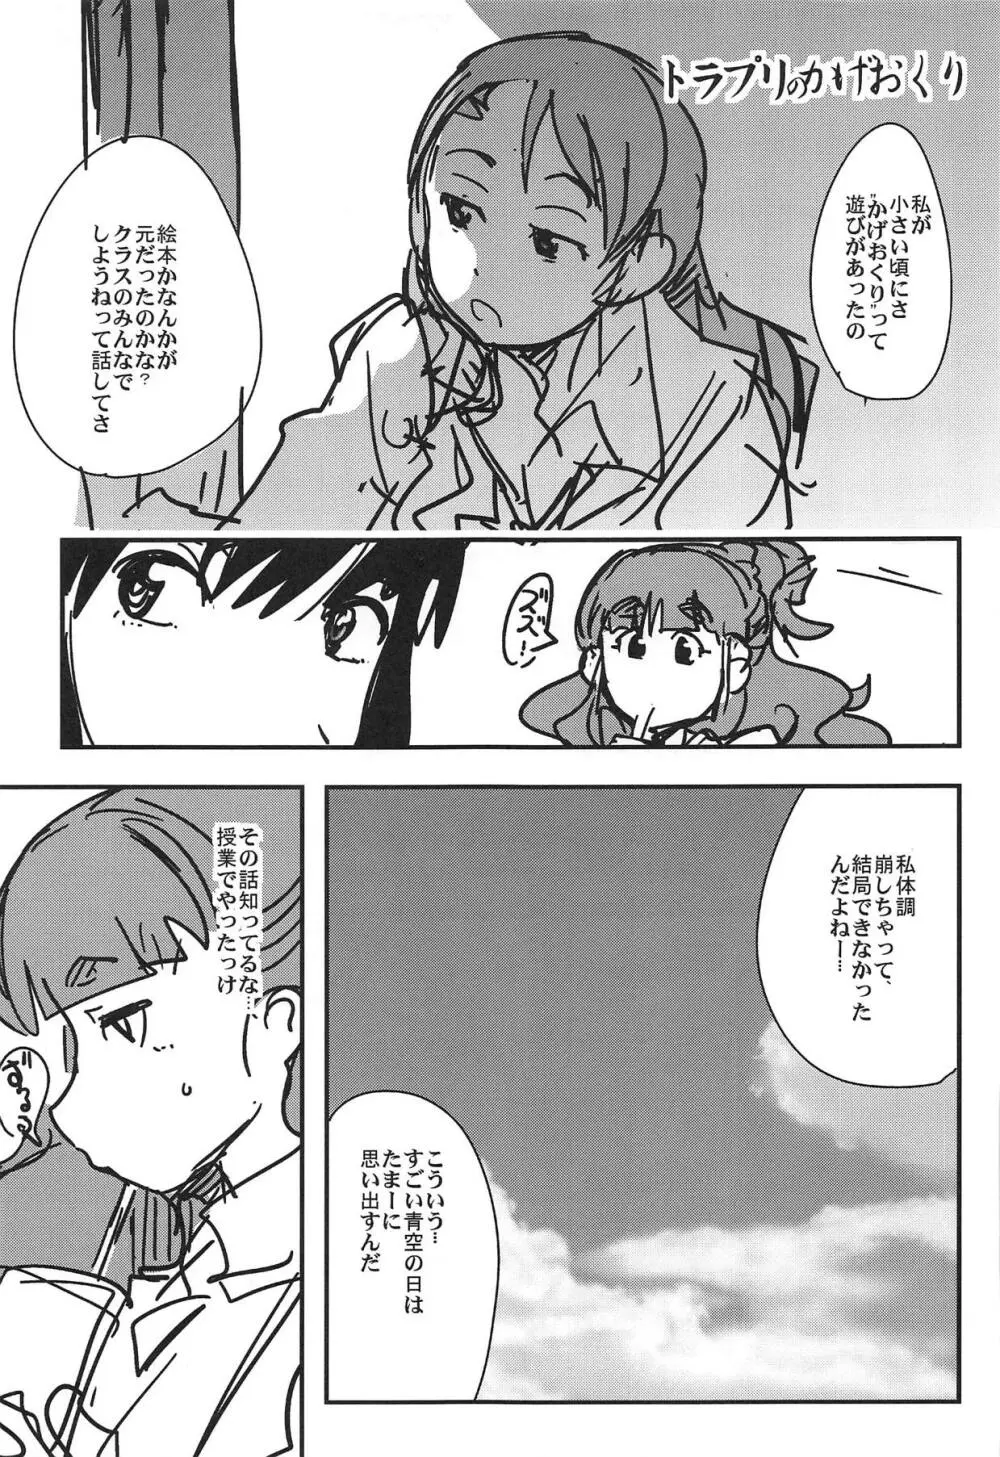 ALL TIME CINDERELLA 神谷奈緒 - page36